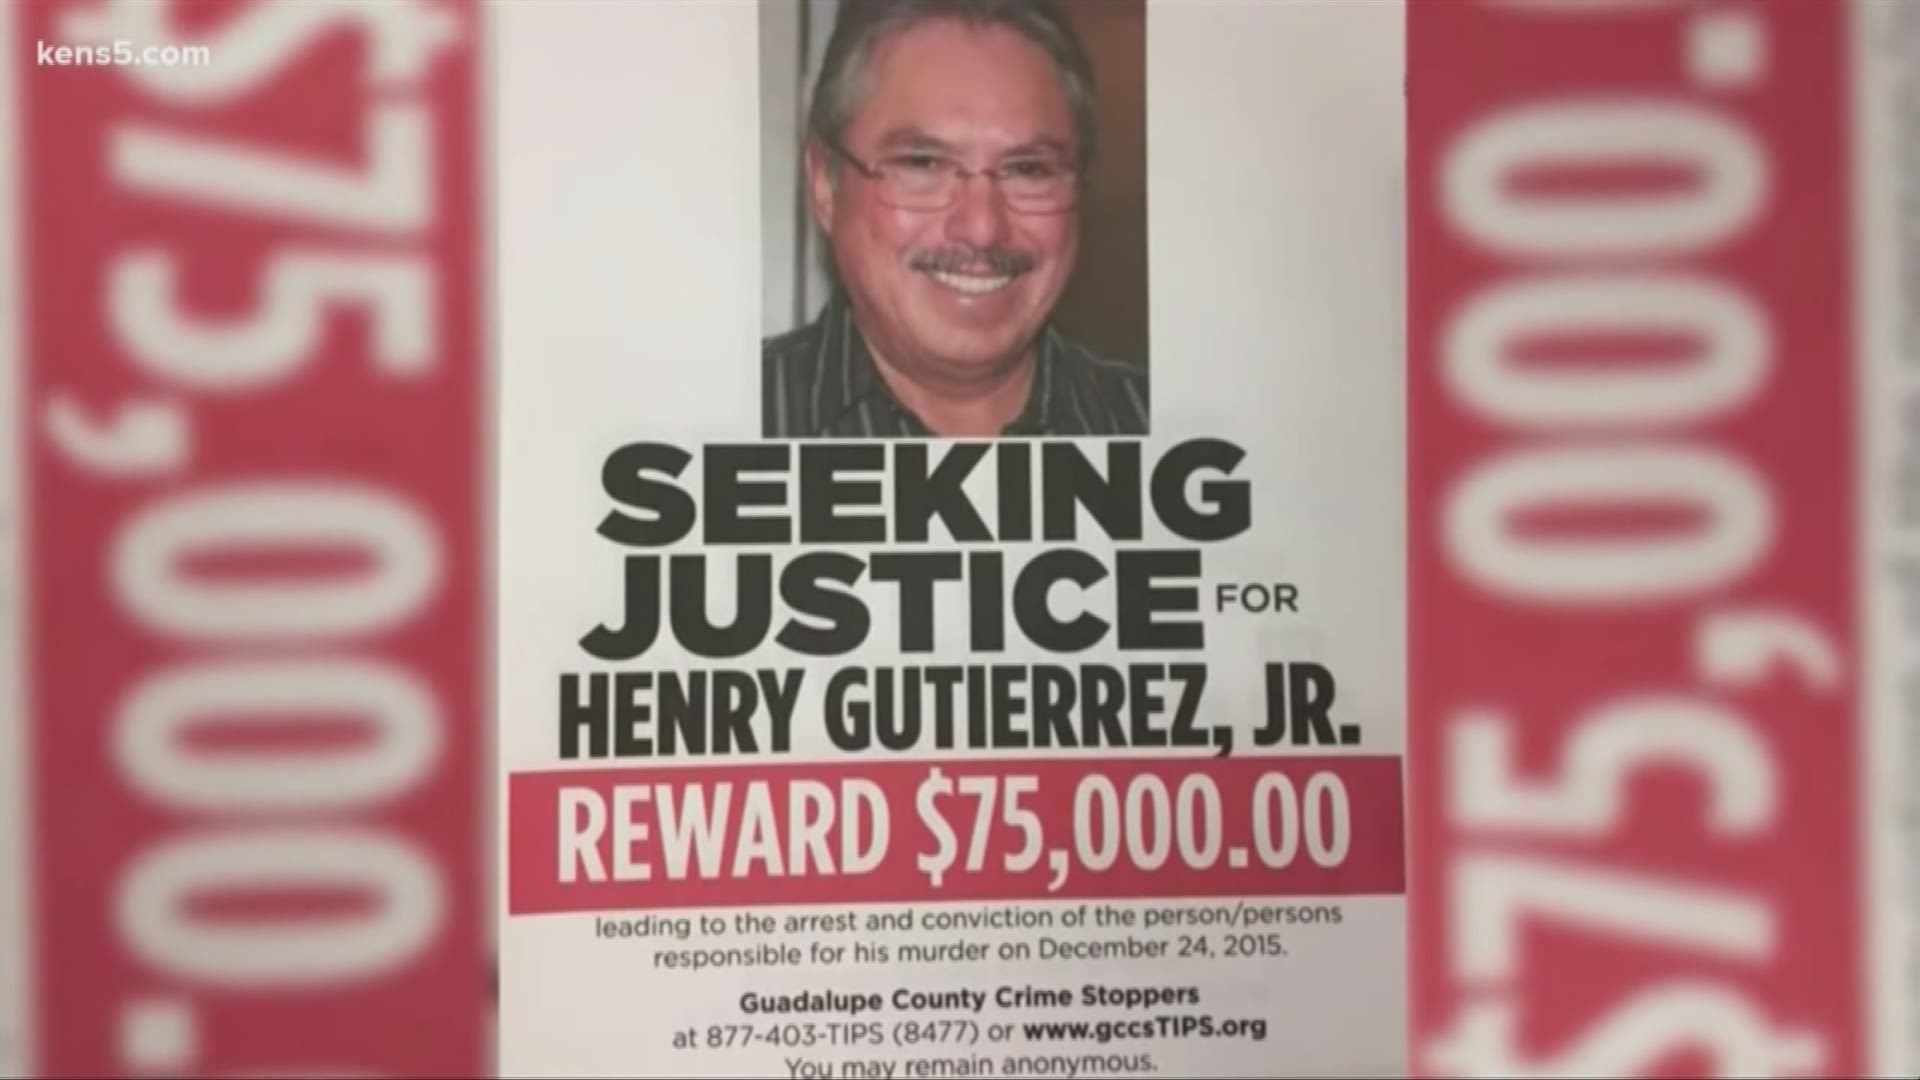 There is a $75,000 reward up for grabs to help solve the case of who killed Schertz businessman Henry Gutierrez.